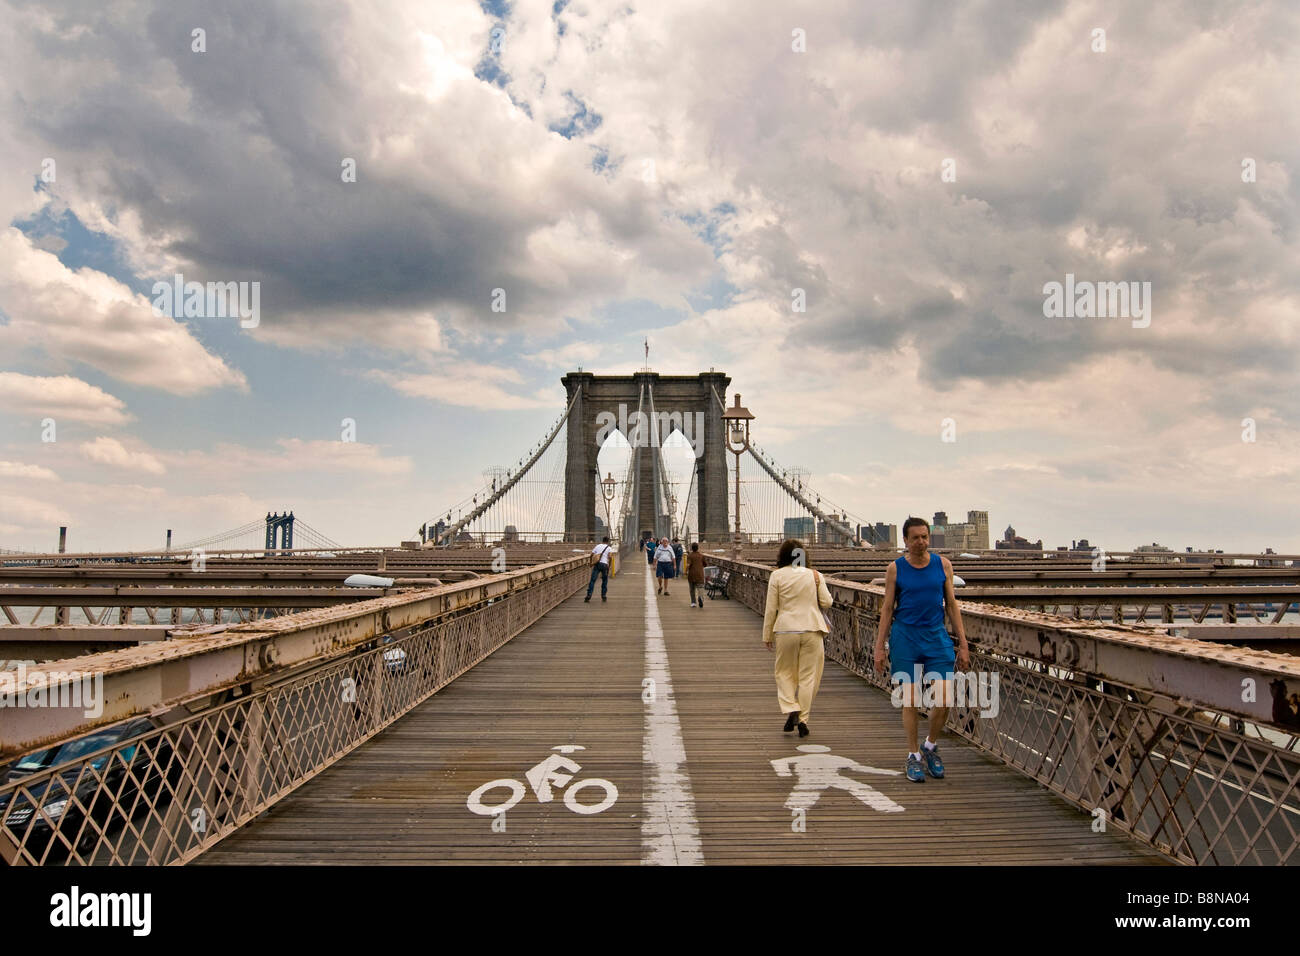 Pedestrian and cycle lanes on the Brooklyn bridge Stock Photo